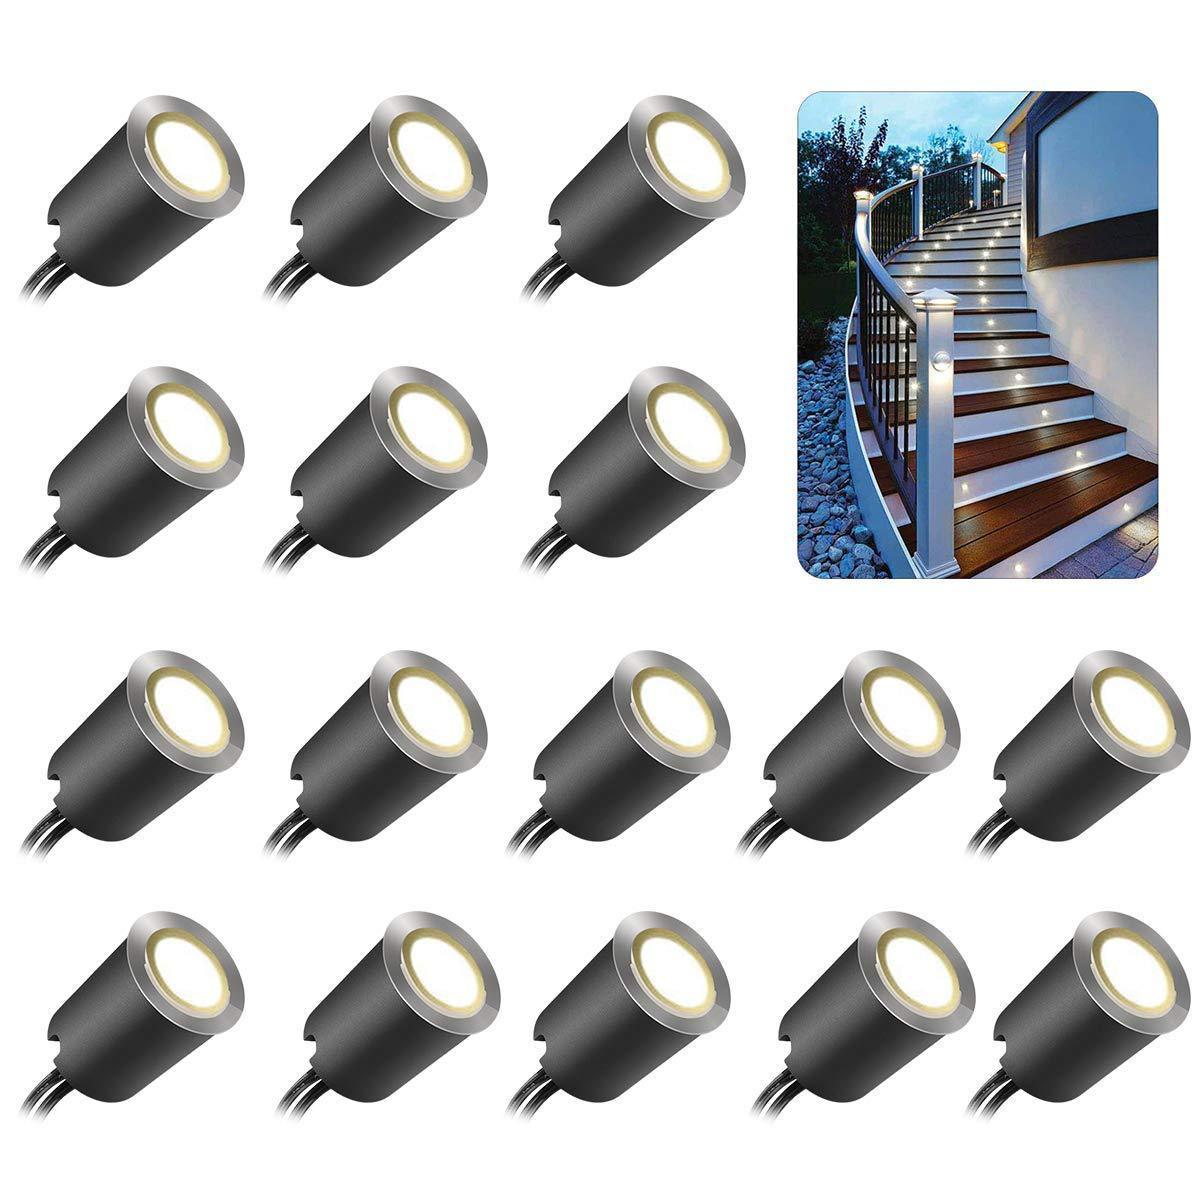 16 Pack Led recessed step light  In Ground Outdoor LED solar step Lights IP67 Waterproof,10V Low Voltage for Garden,Yard Stair,Patio,Floor,Kitchen Decoration